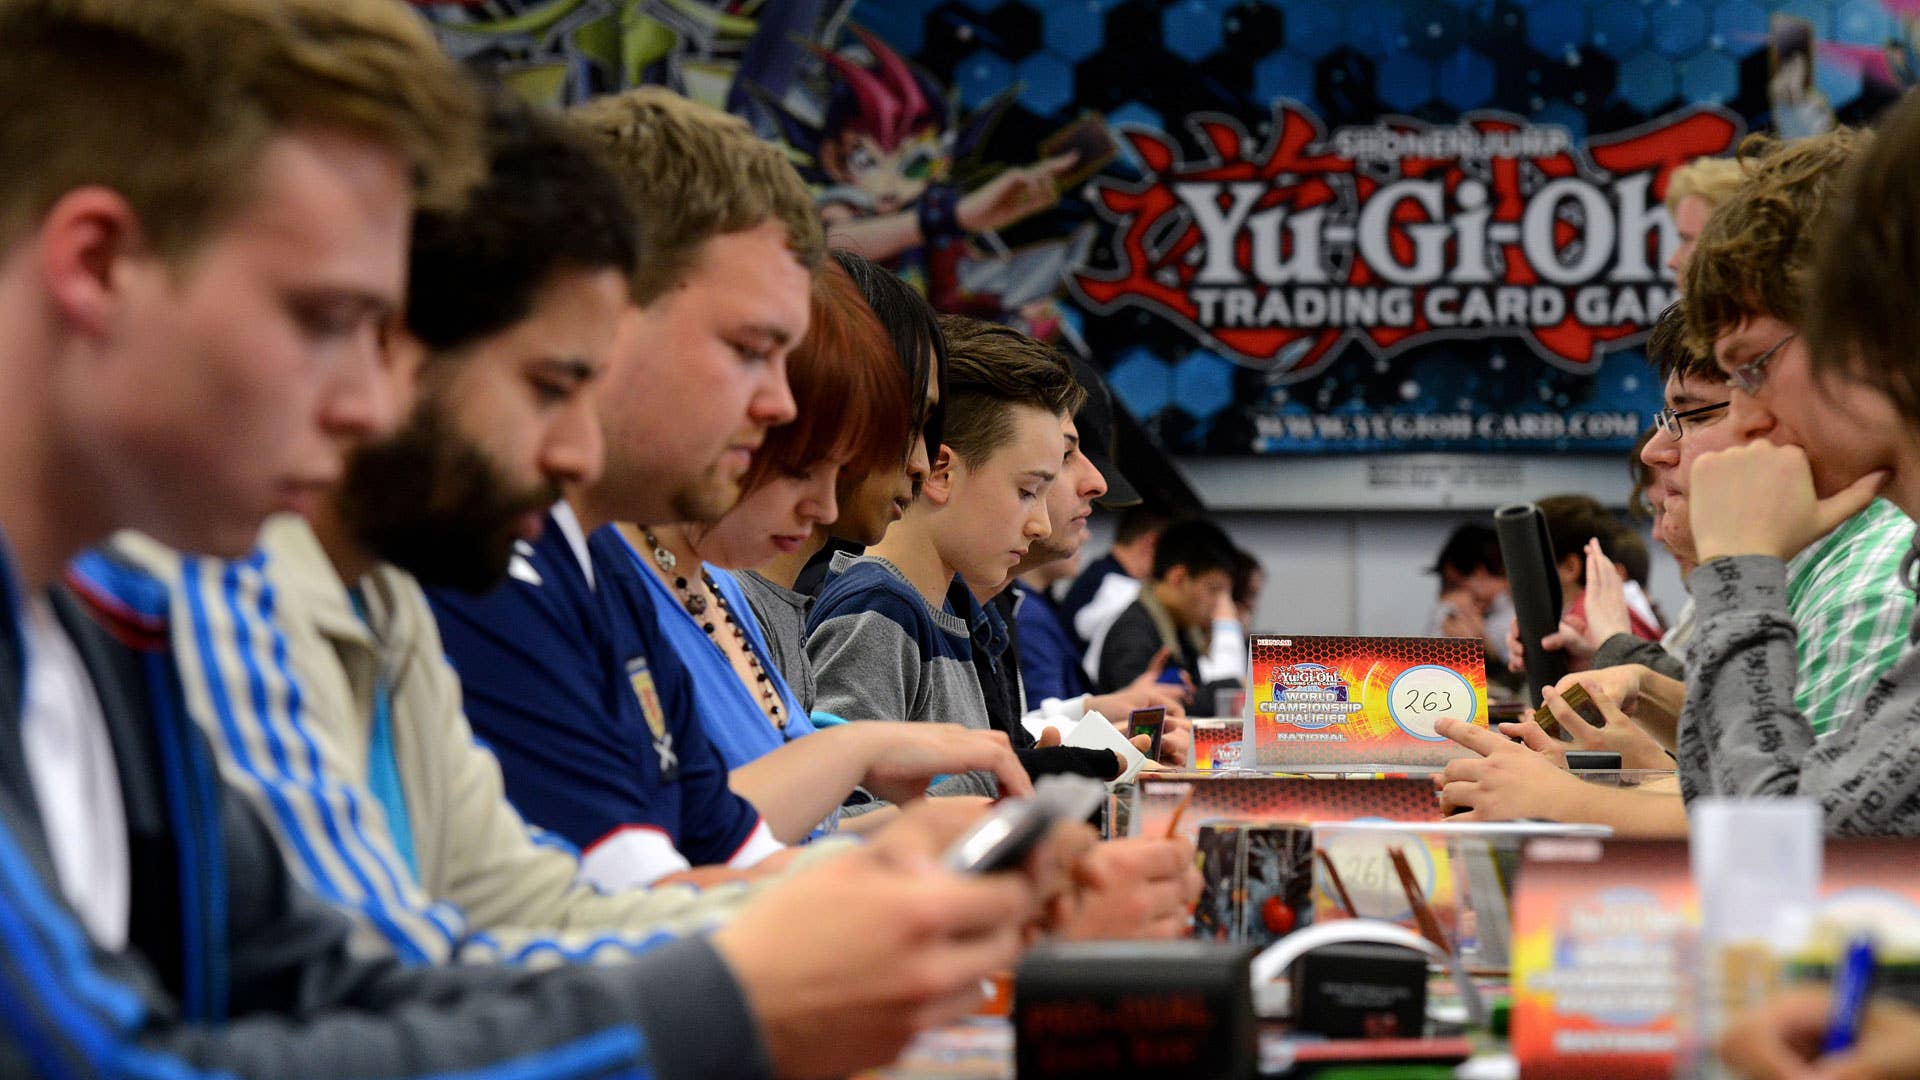 Participants of the German Yu-Gi-Oh! Trading Card Game Championships